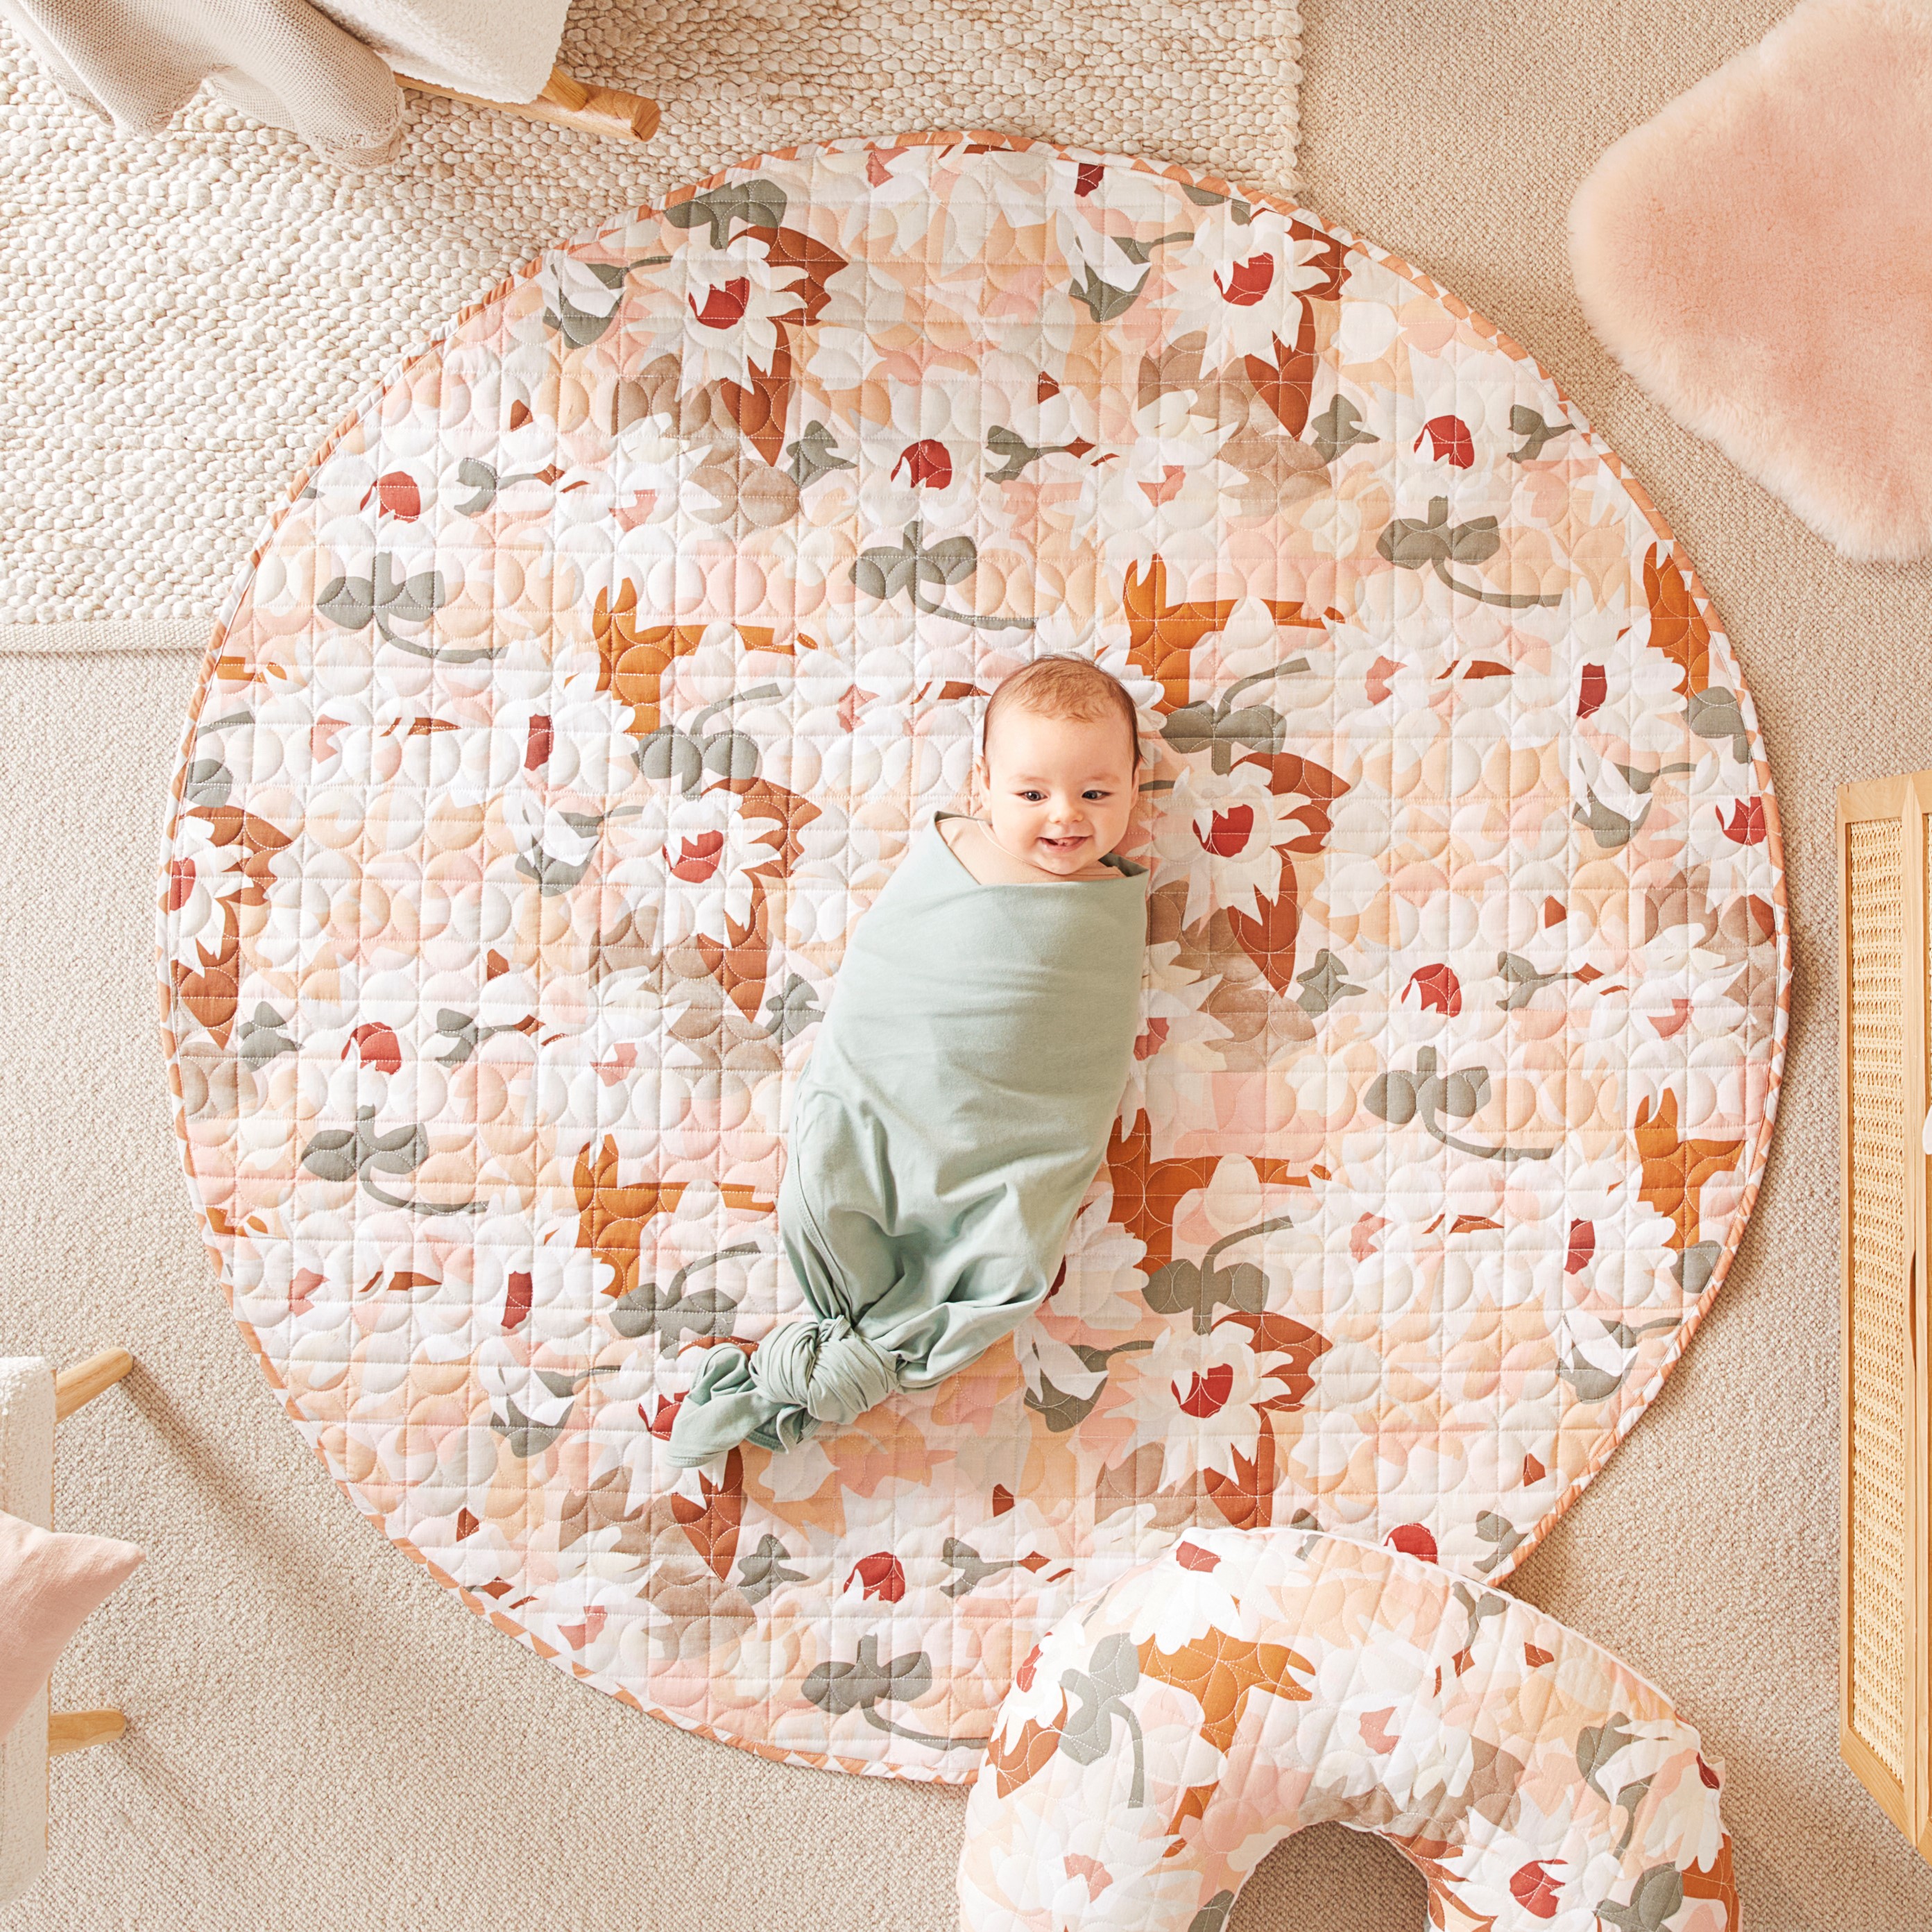 Adairs Baby - Kimmy Hogan Whisper Pink Cot Quilt Cover, Nursery